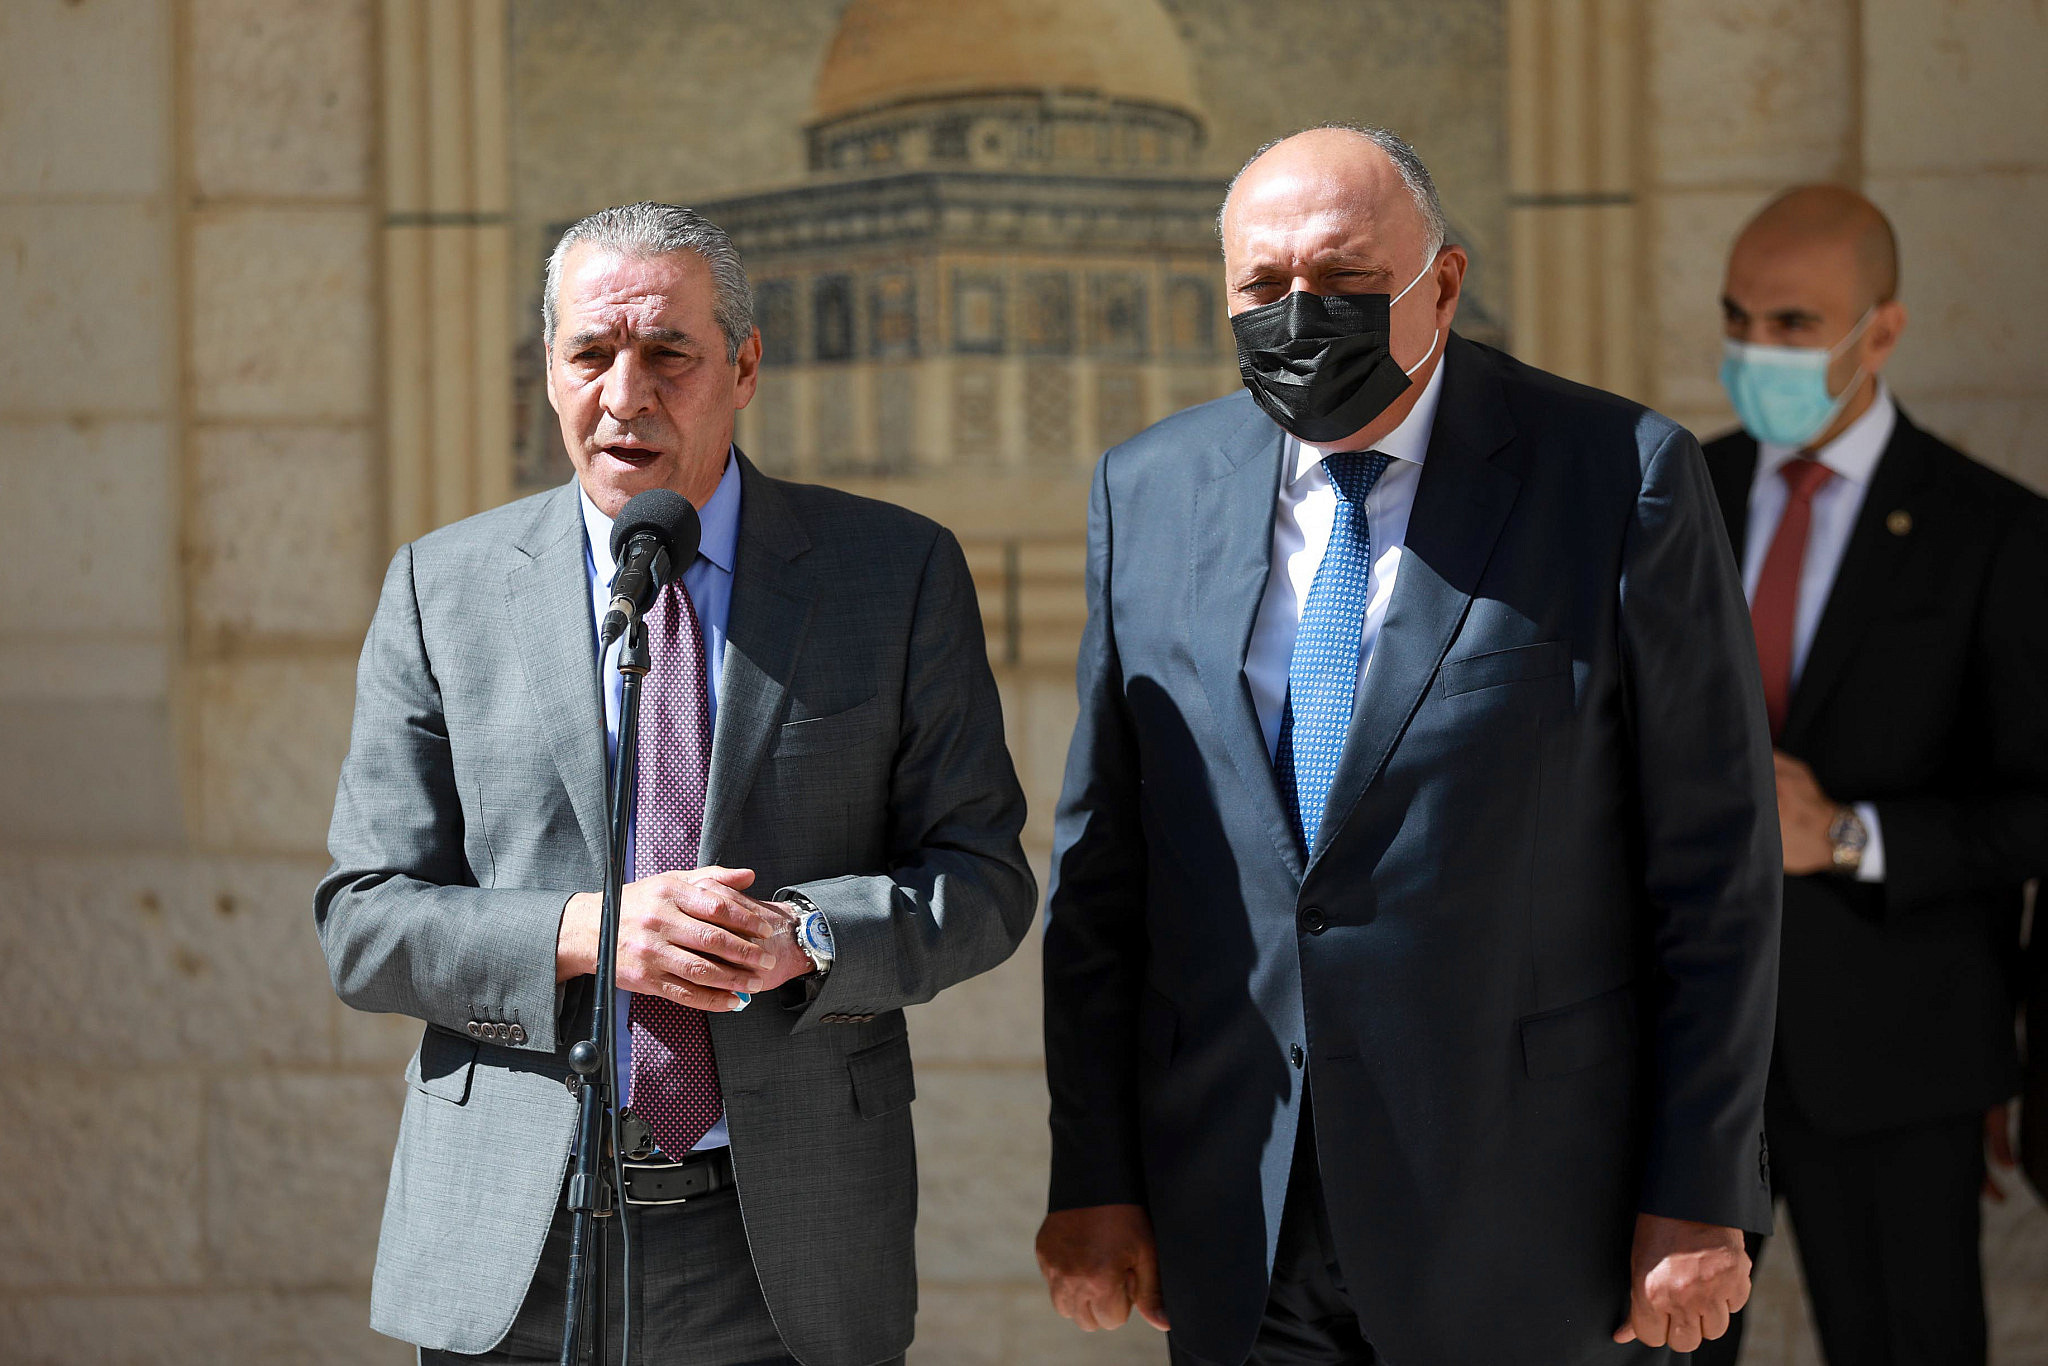 Palestinian Minister Hussein al-Sheikh (left) seen with Egyptian Foreign Minister Sameh Shoukry as he arrives for a meeting in the West Bank city of Ramallah, July 24, 2021. (Flash90)